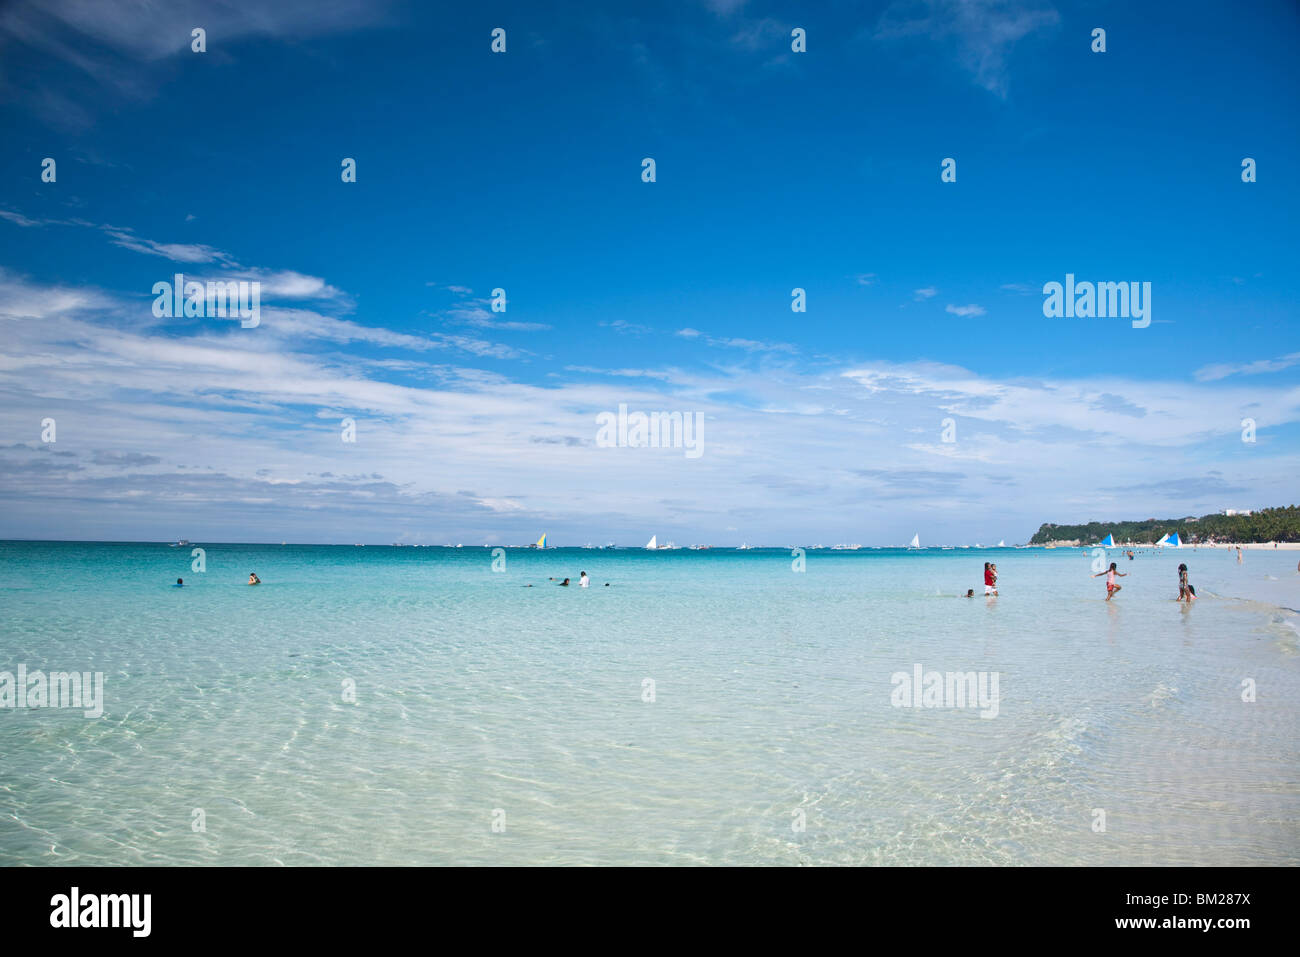 White Beach, one of the best white sand beaches in the world, Boracay, Aklan, Philippines, Southeast Asia Stock Photo